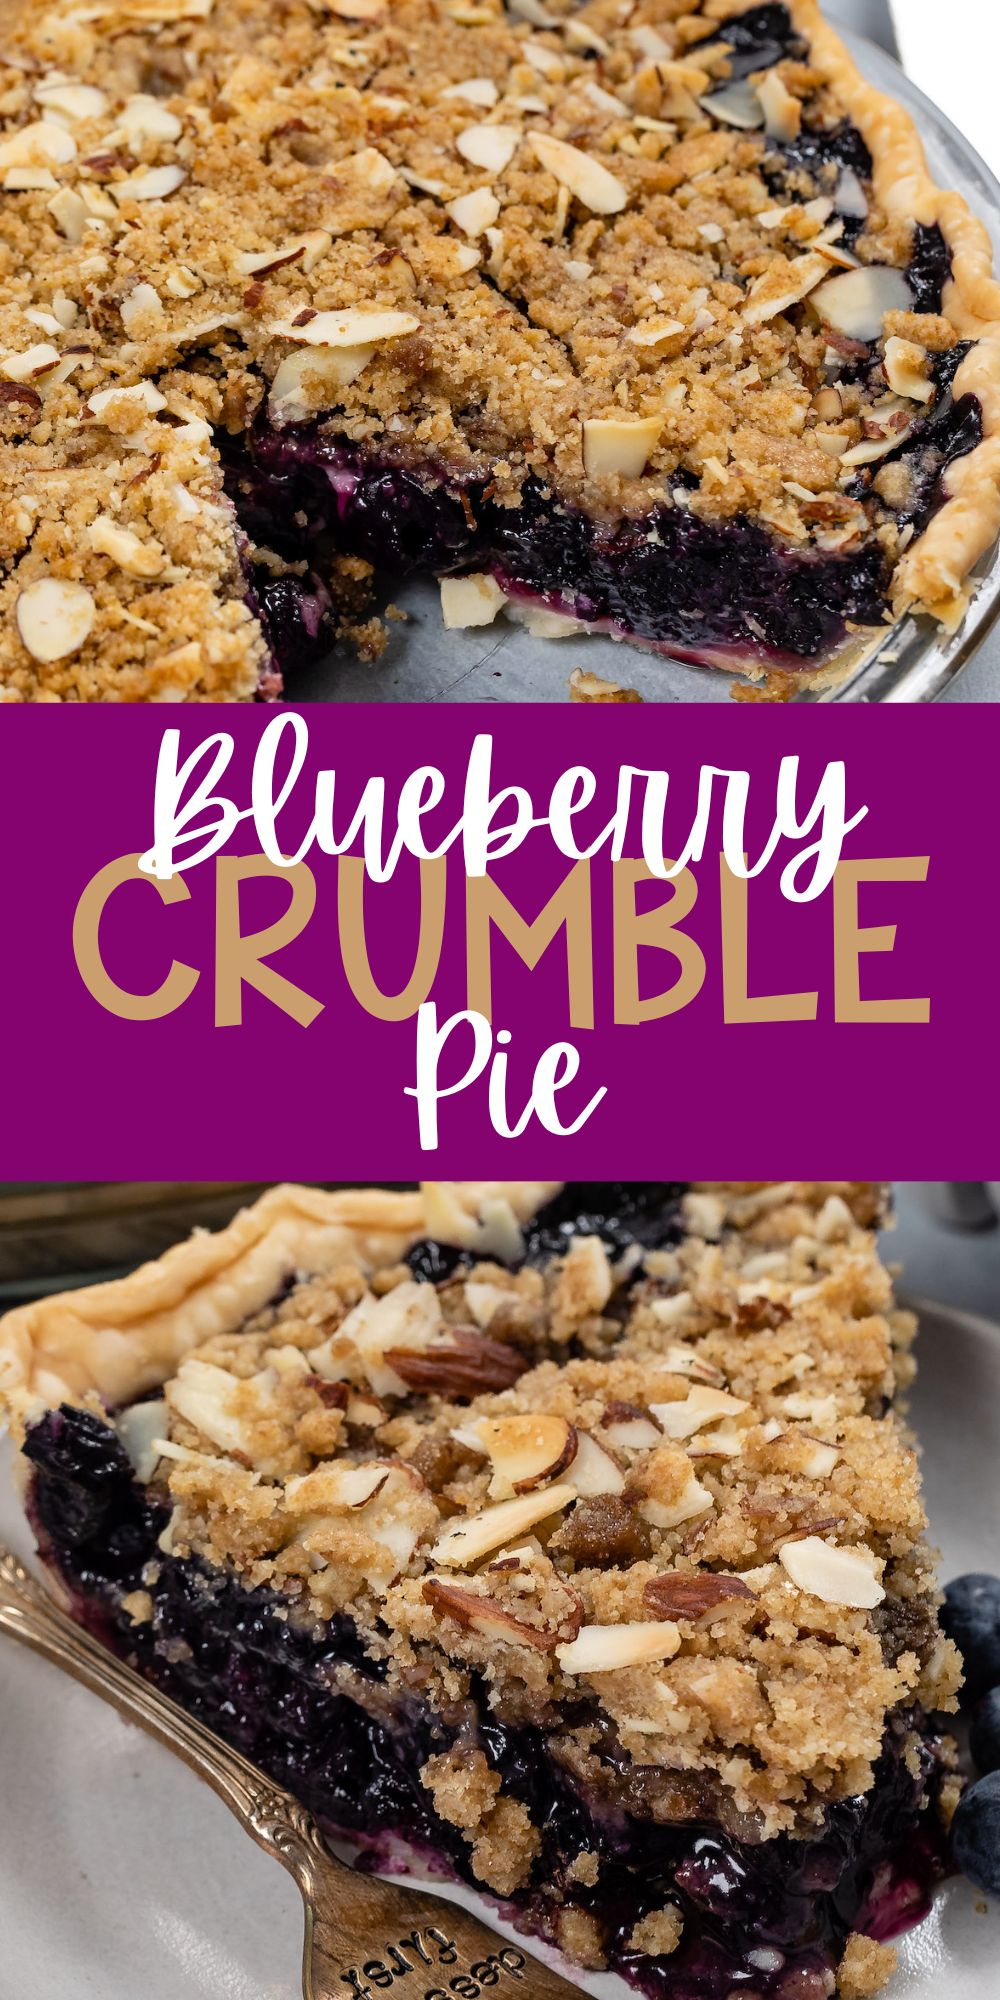 two photos of blueberry pie in a clear plate with crumble on top with words on the image.